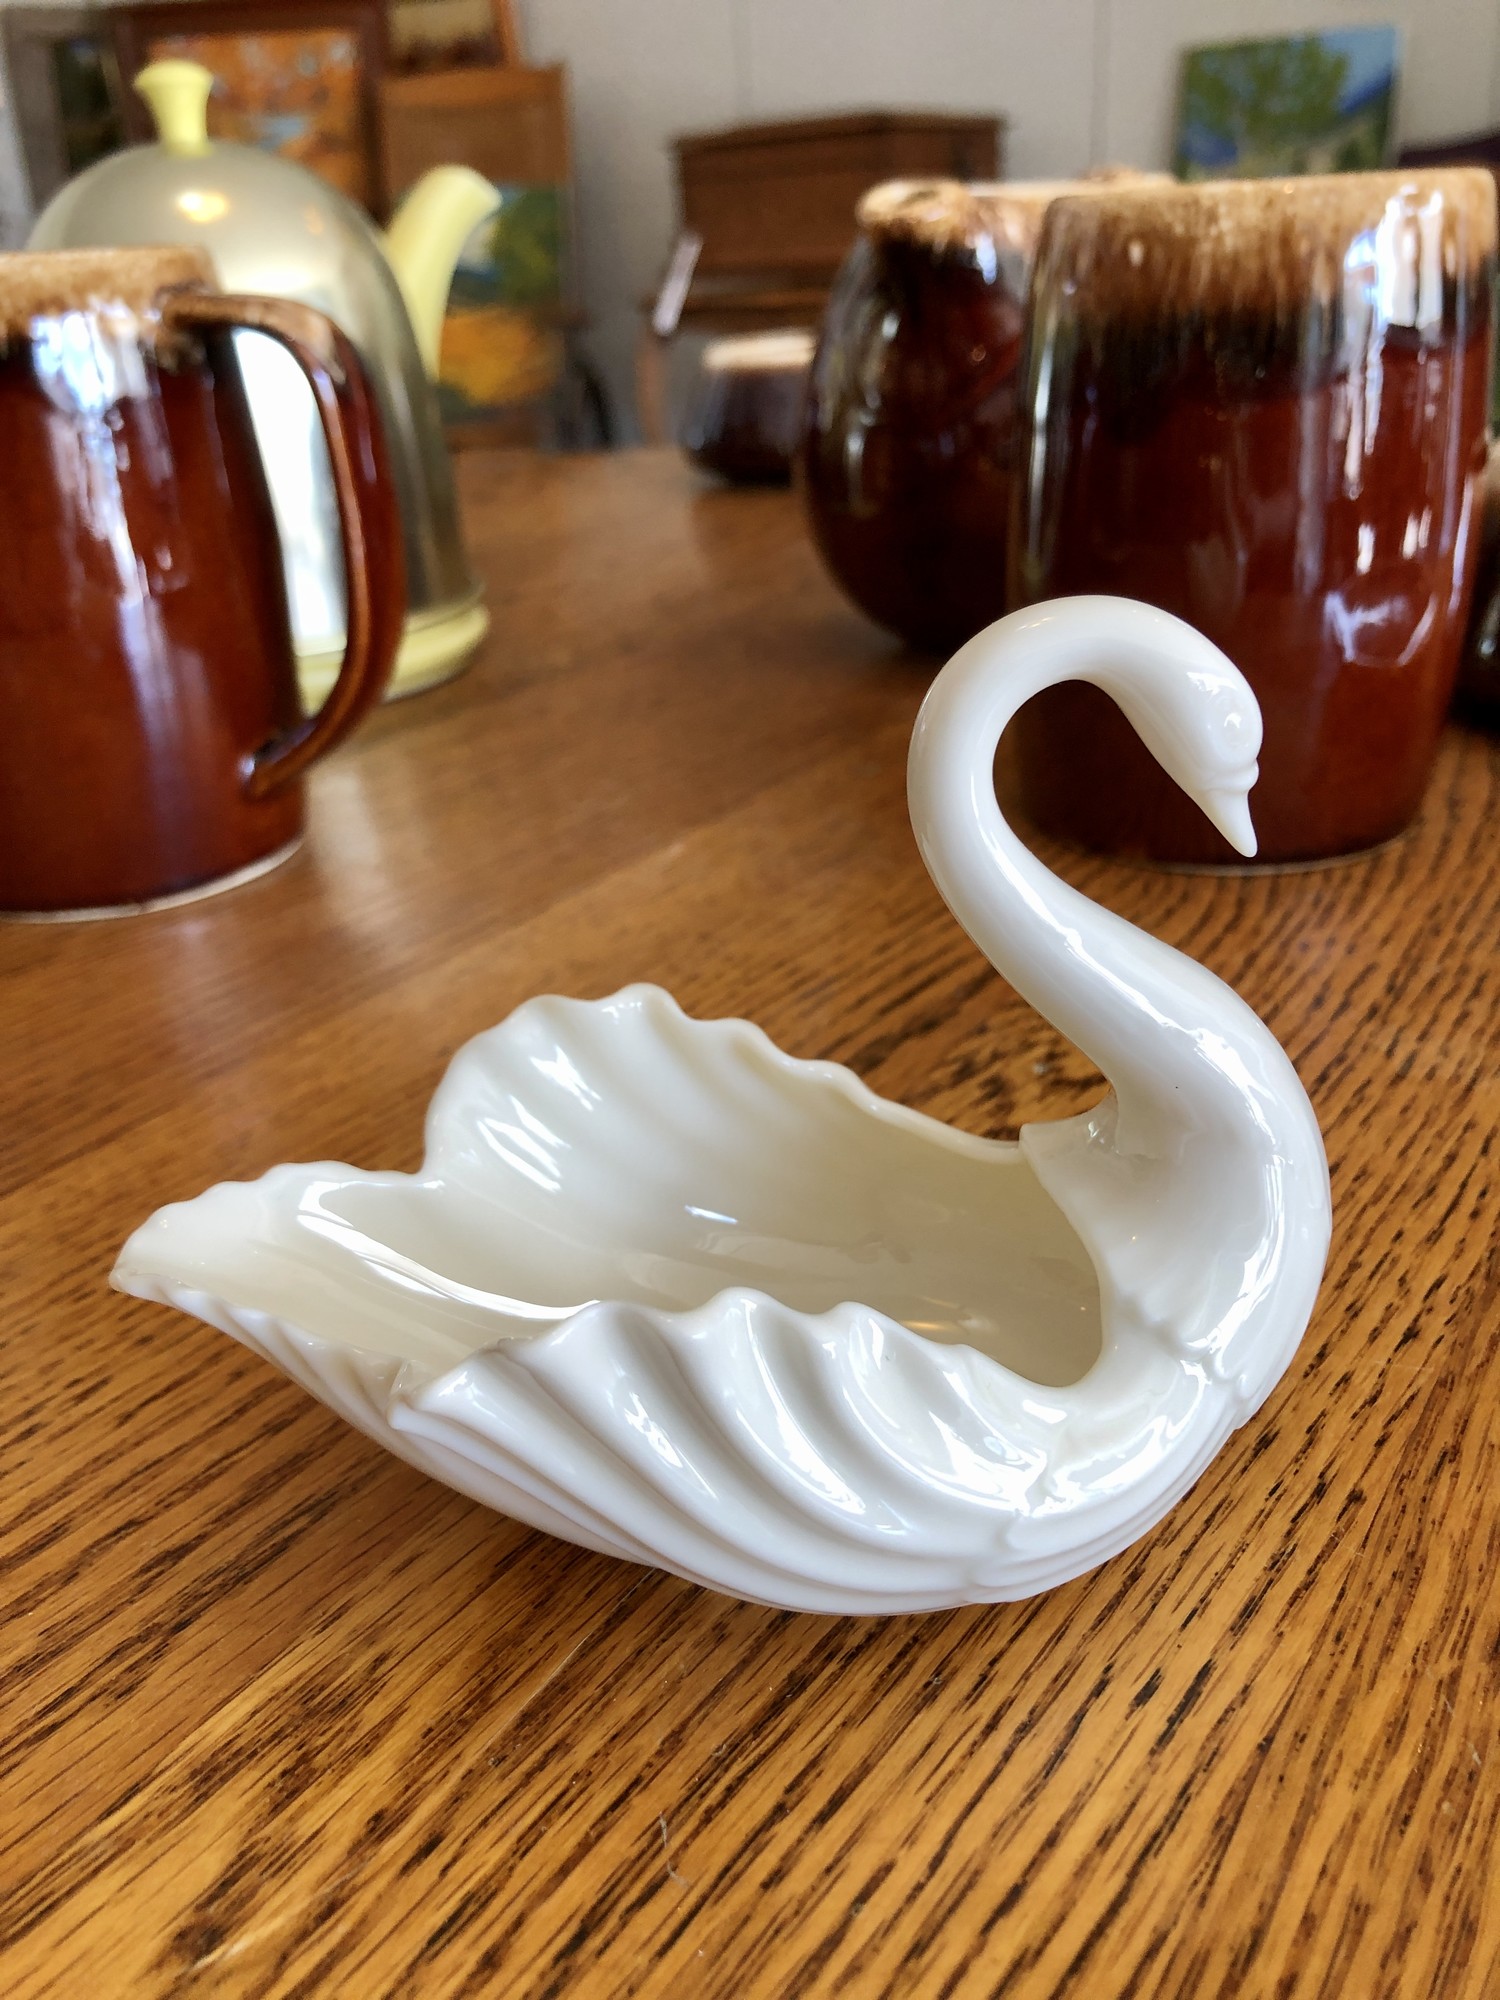 Lovely vintage Lenox Swan Trinket Dish. Off White, Size: 5in
Ships USPS Priority Mail